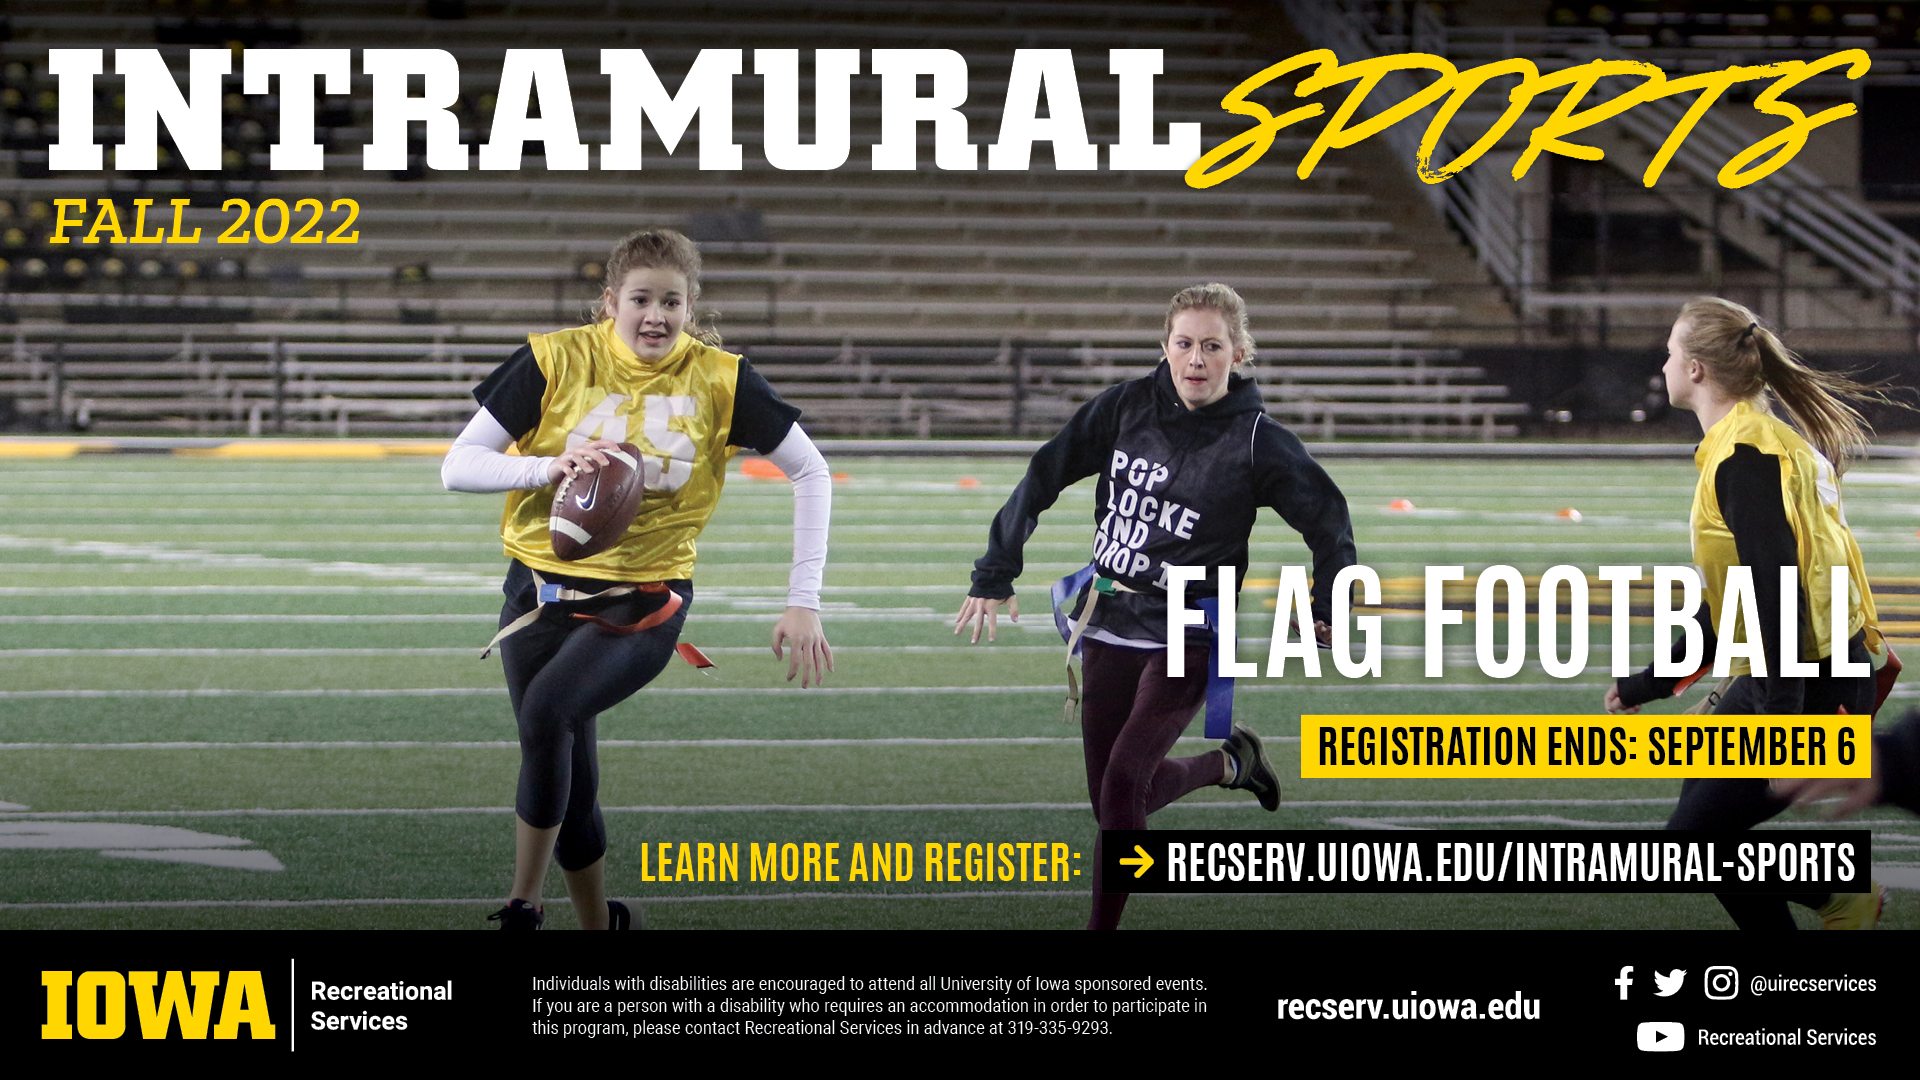 Intramural Sports Fall 2022: Flag Football. Learn more and register at reserv.uiowa.edu/intramural-sports